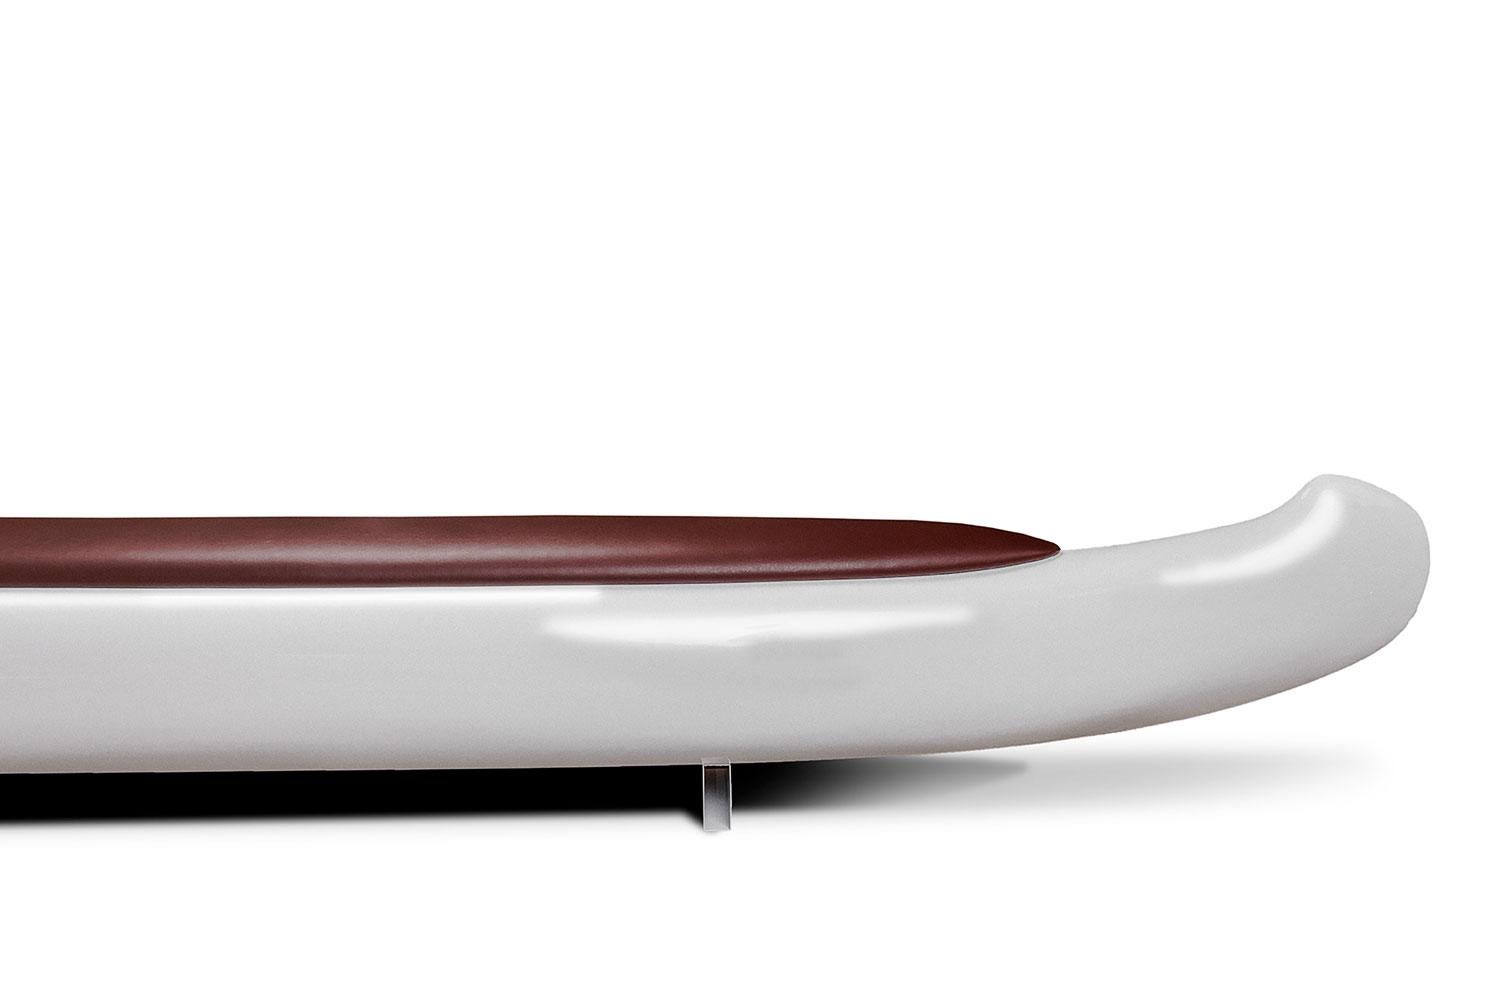 Made in Italy and designed by Verter Turroni, Trip Bench by Imperfetto is made from fiberglass with a brown leatherette seat and steel base. This sculptural furniture piece is a delightful place to light in both commercial and residential settings